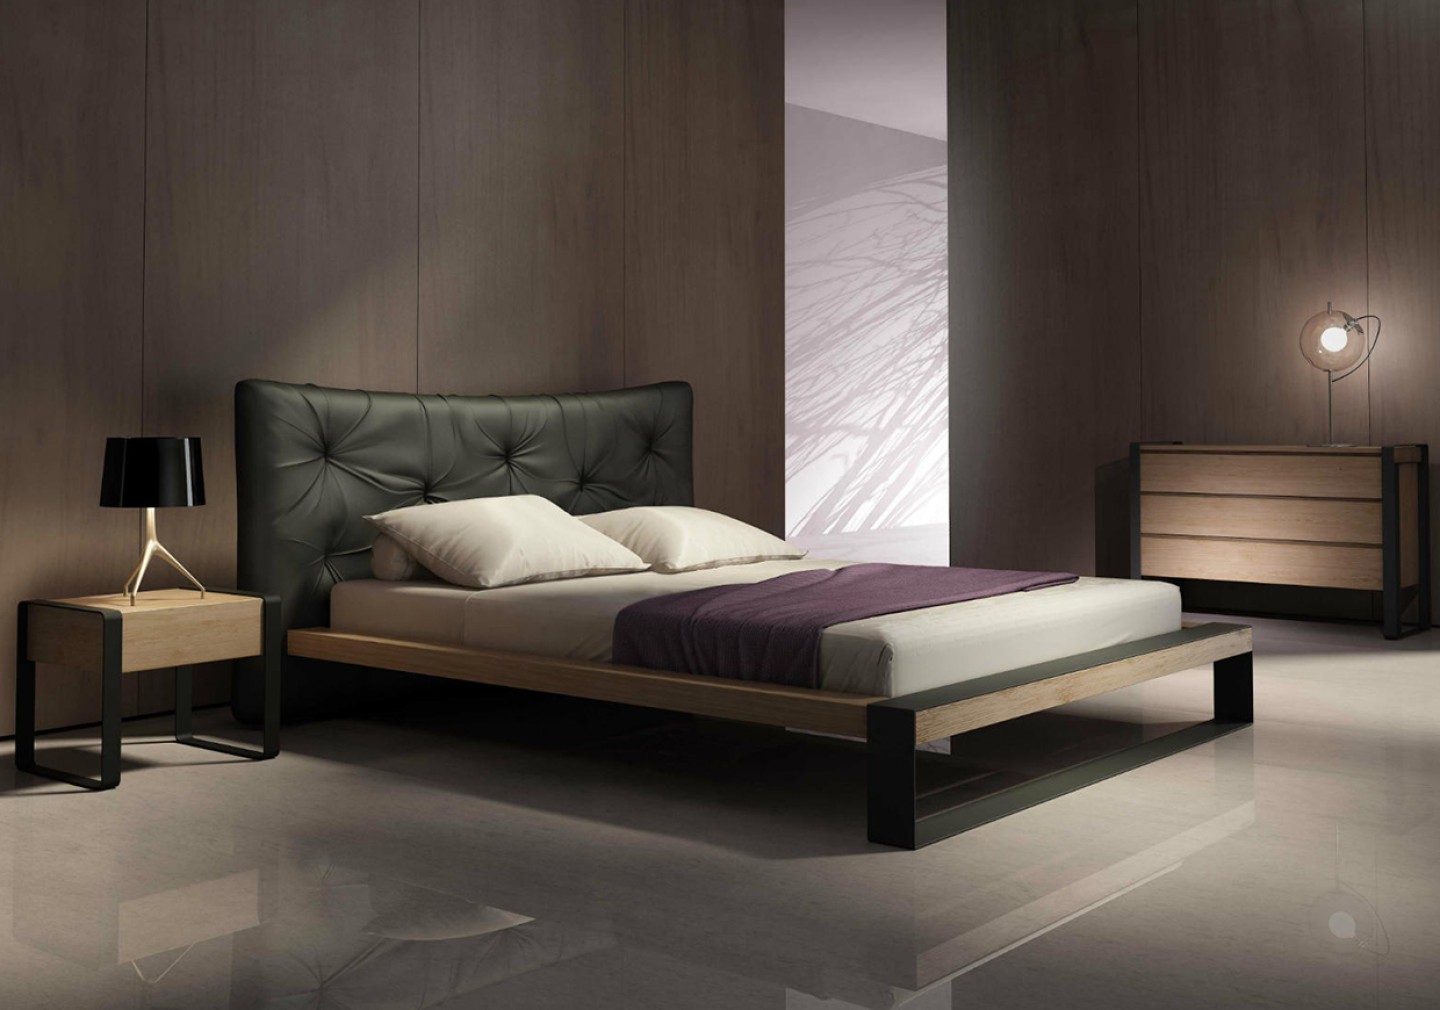 THE DANTE BED